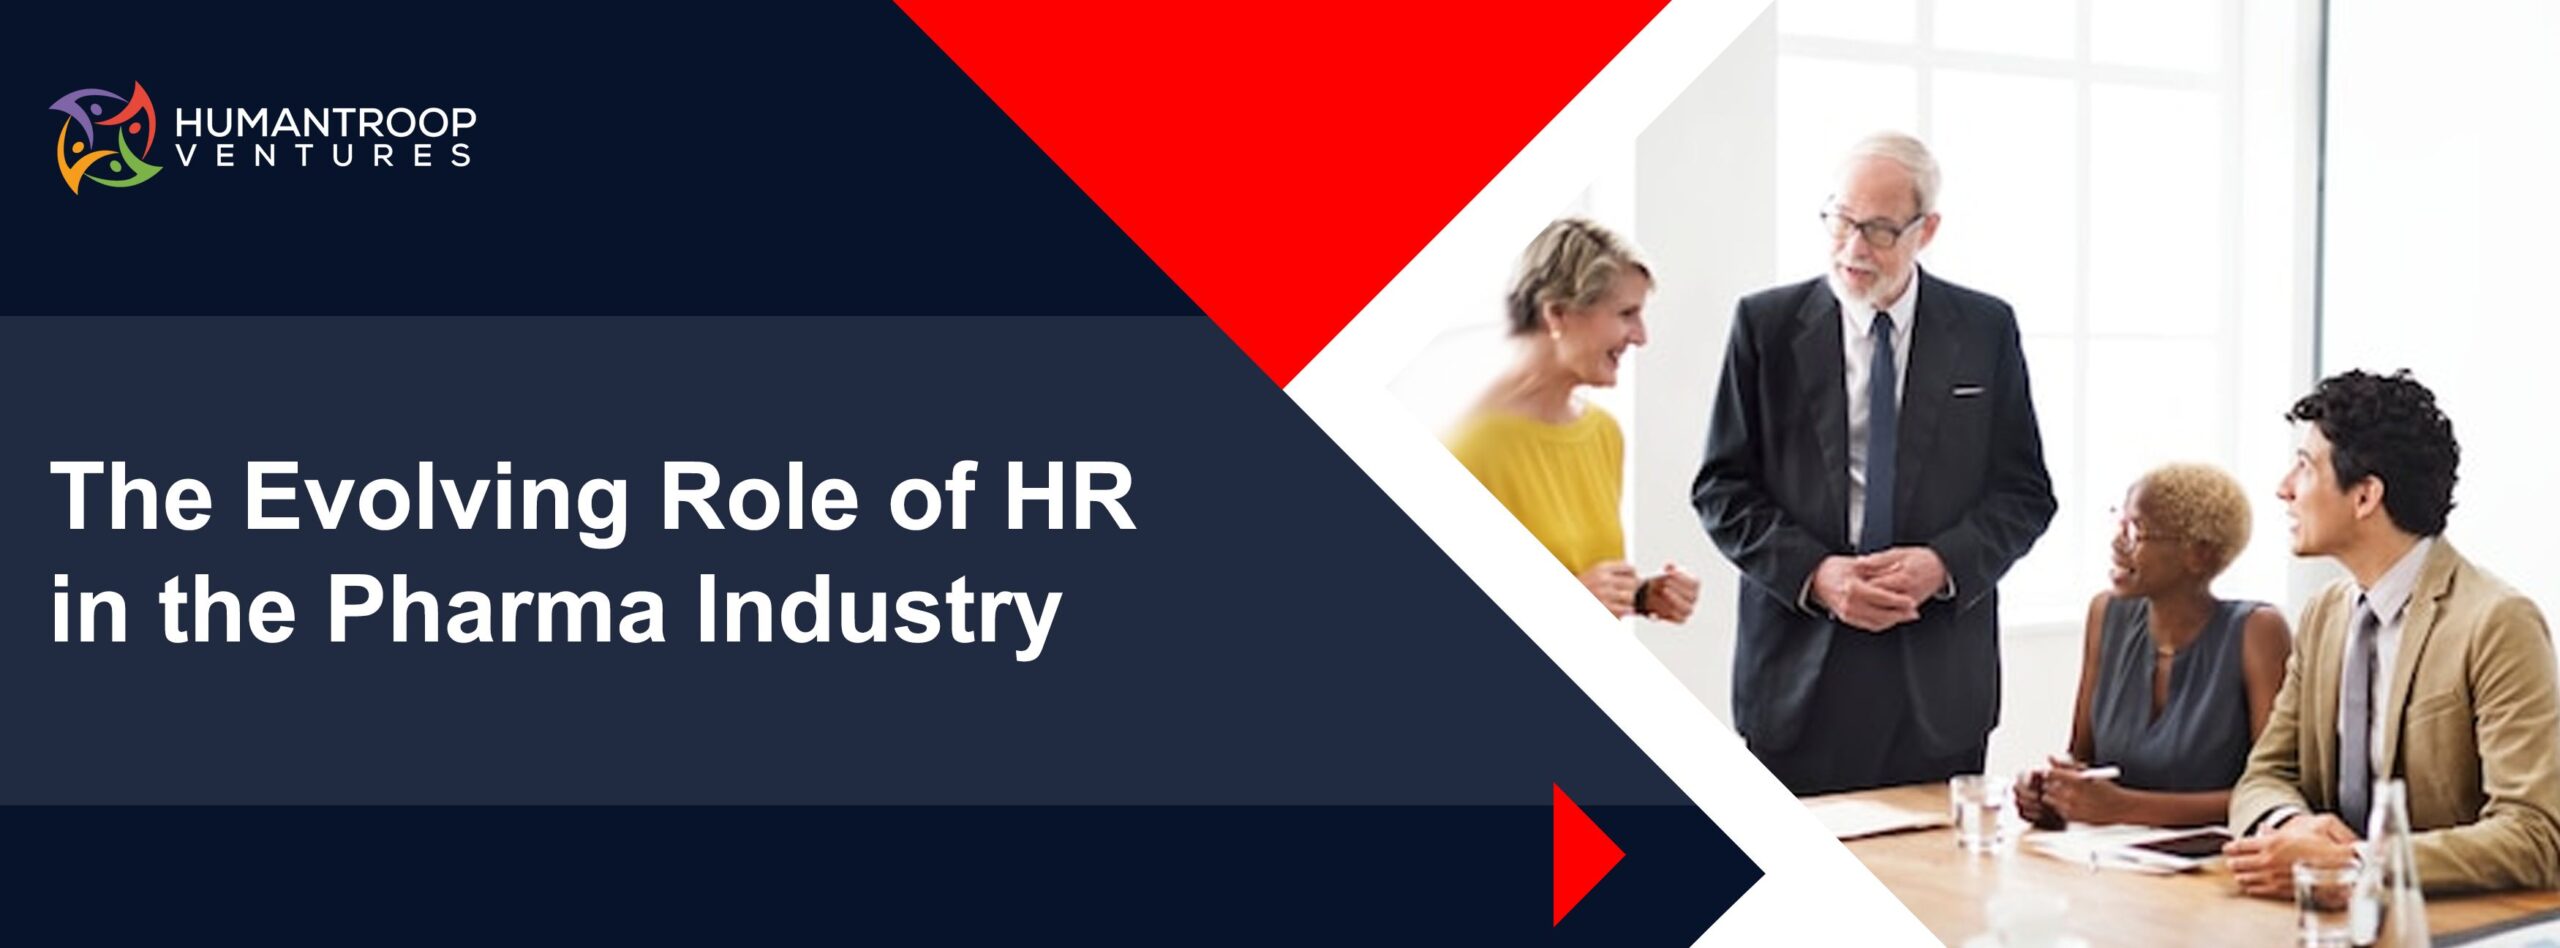 HTV blog The Evolving Role of HR in the Pharma Industry-compressed